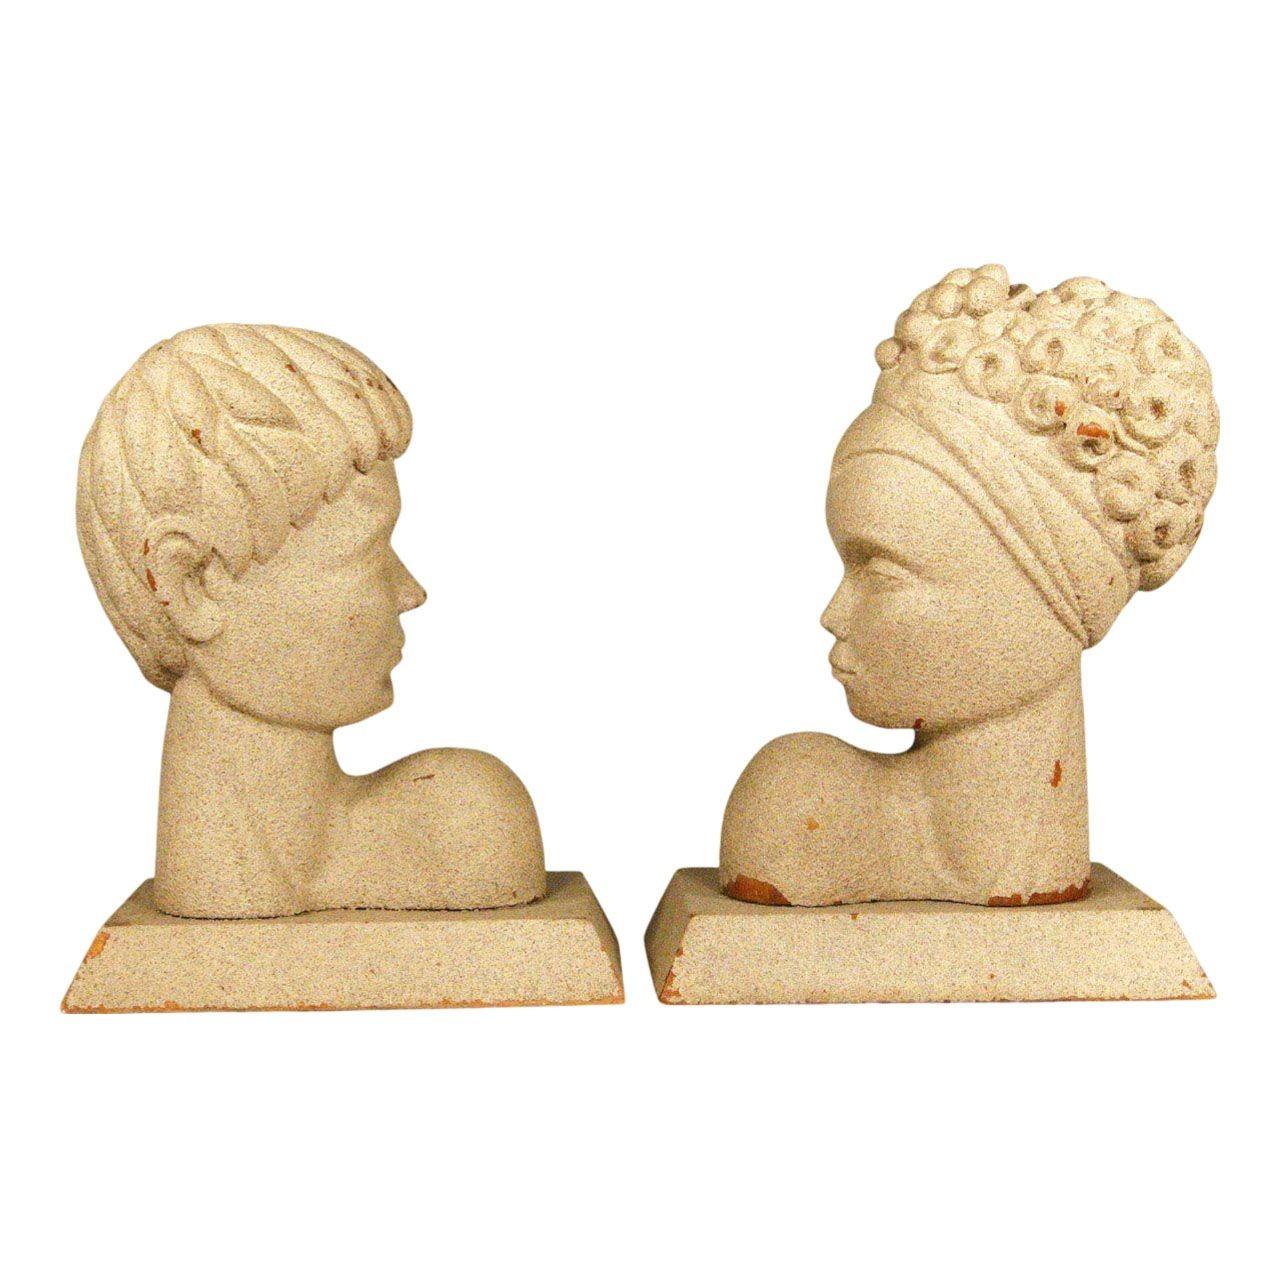 This pair of Hawaiian Mid-Century Modern bookends feature skillfully carved male and female busts that have been coated in a sand/plaster finish further enhancing their antiqued look. The figures were originally lamps and still retain holes if